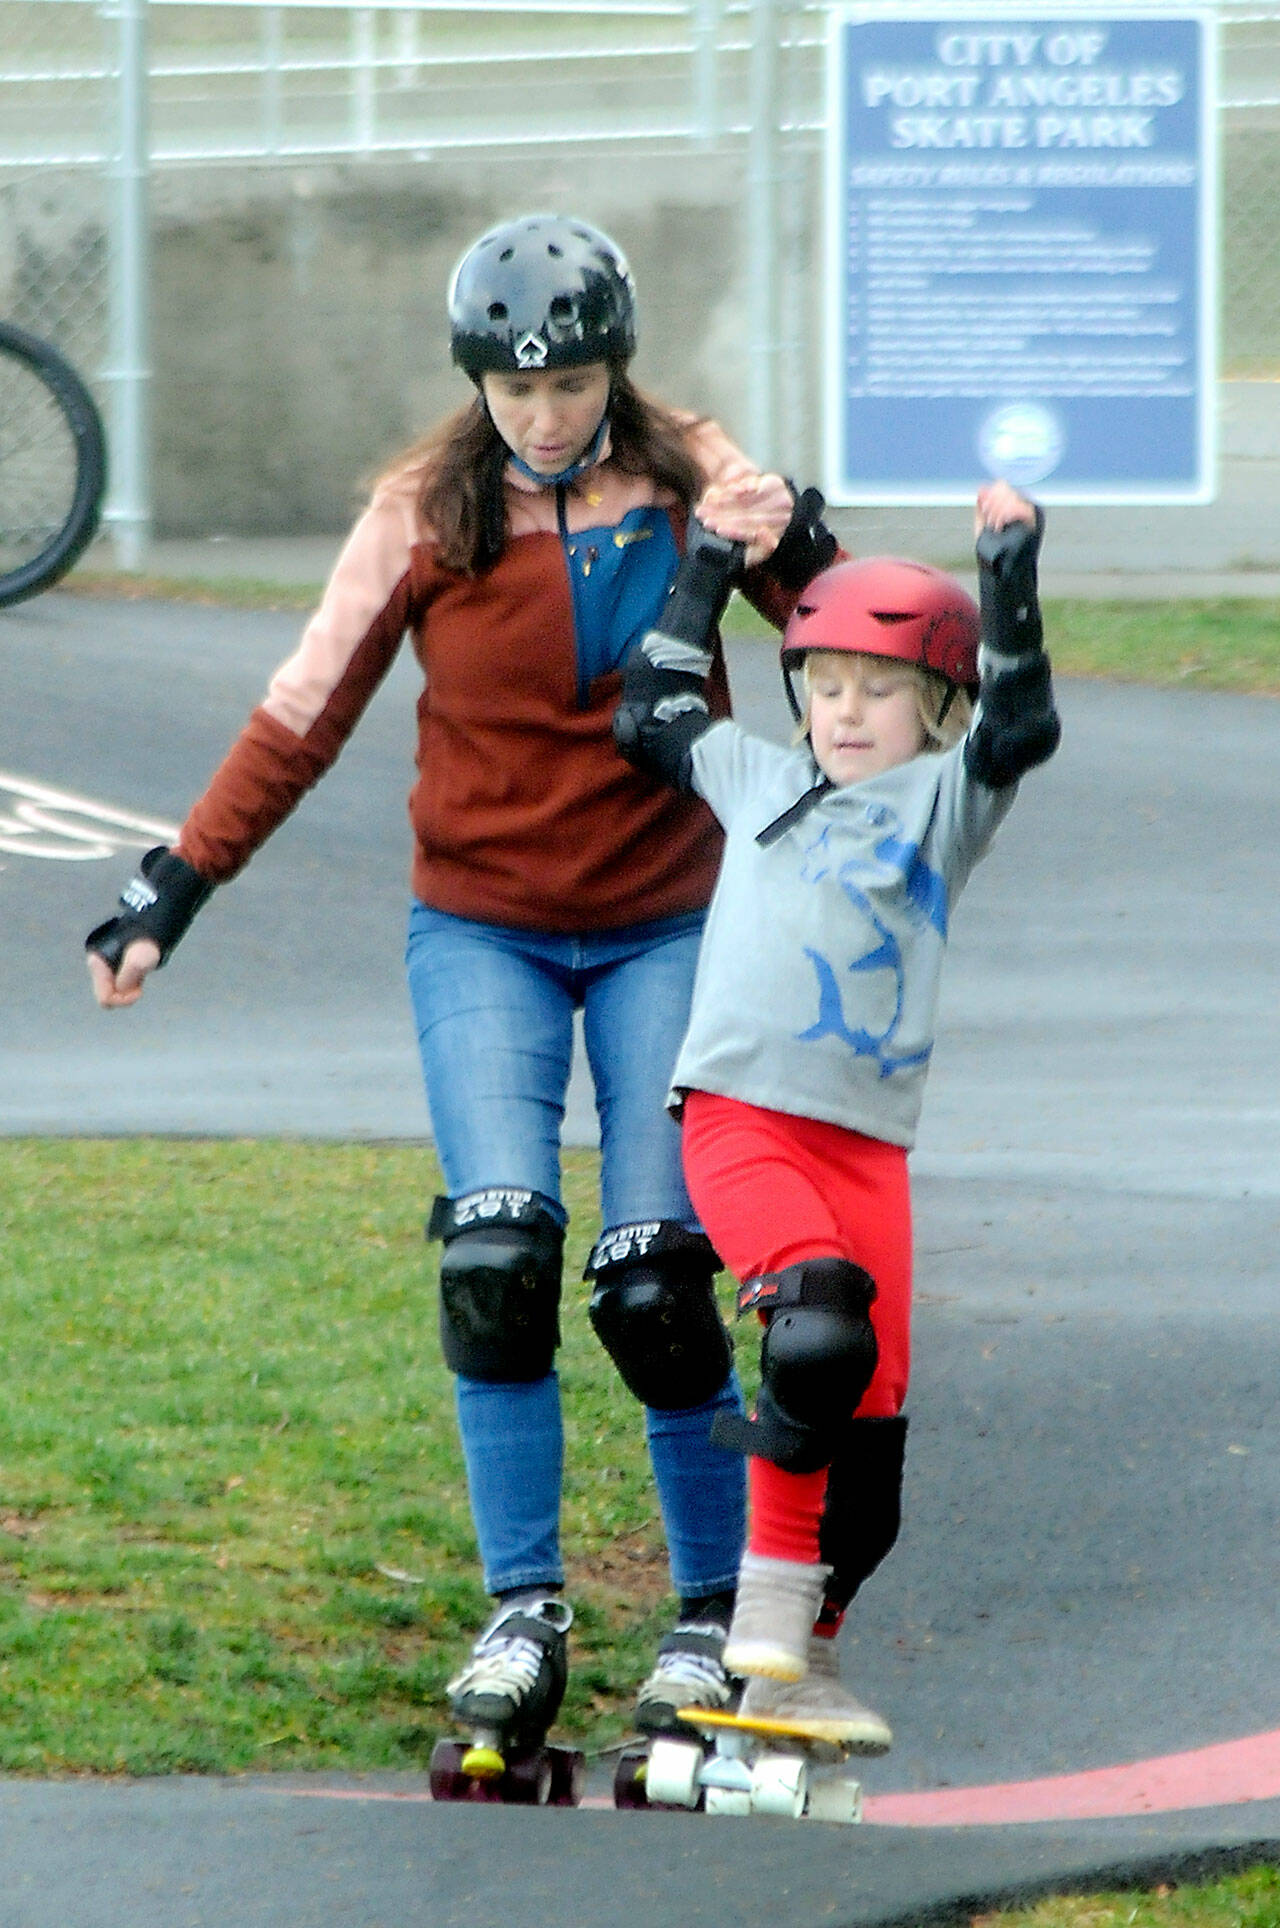 Shawna Bebo of Sequim lends a balancing hand to her son, Enzo Bebo, 7, at the Port Angeles Pump Track at Erickson Playfield in Port Angeles last weekend. The pair were on a family outing with a stop at the popular attraction. The 14,442-square-foot pump track is the largest Velosolutions pump track in the Pacific Northwest and the first public adaptive track in the nation. (Keith Thorpe/Peninsula Daily News)